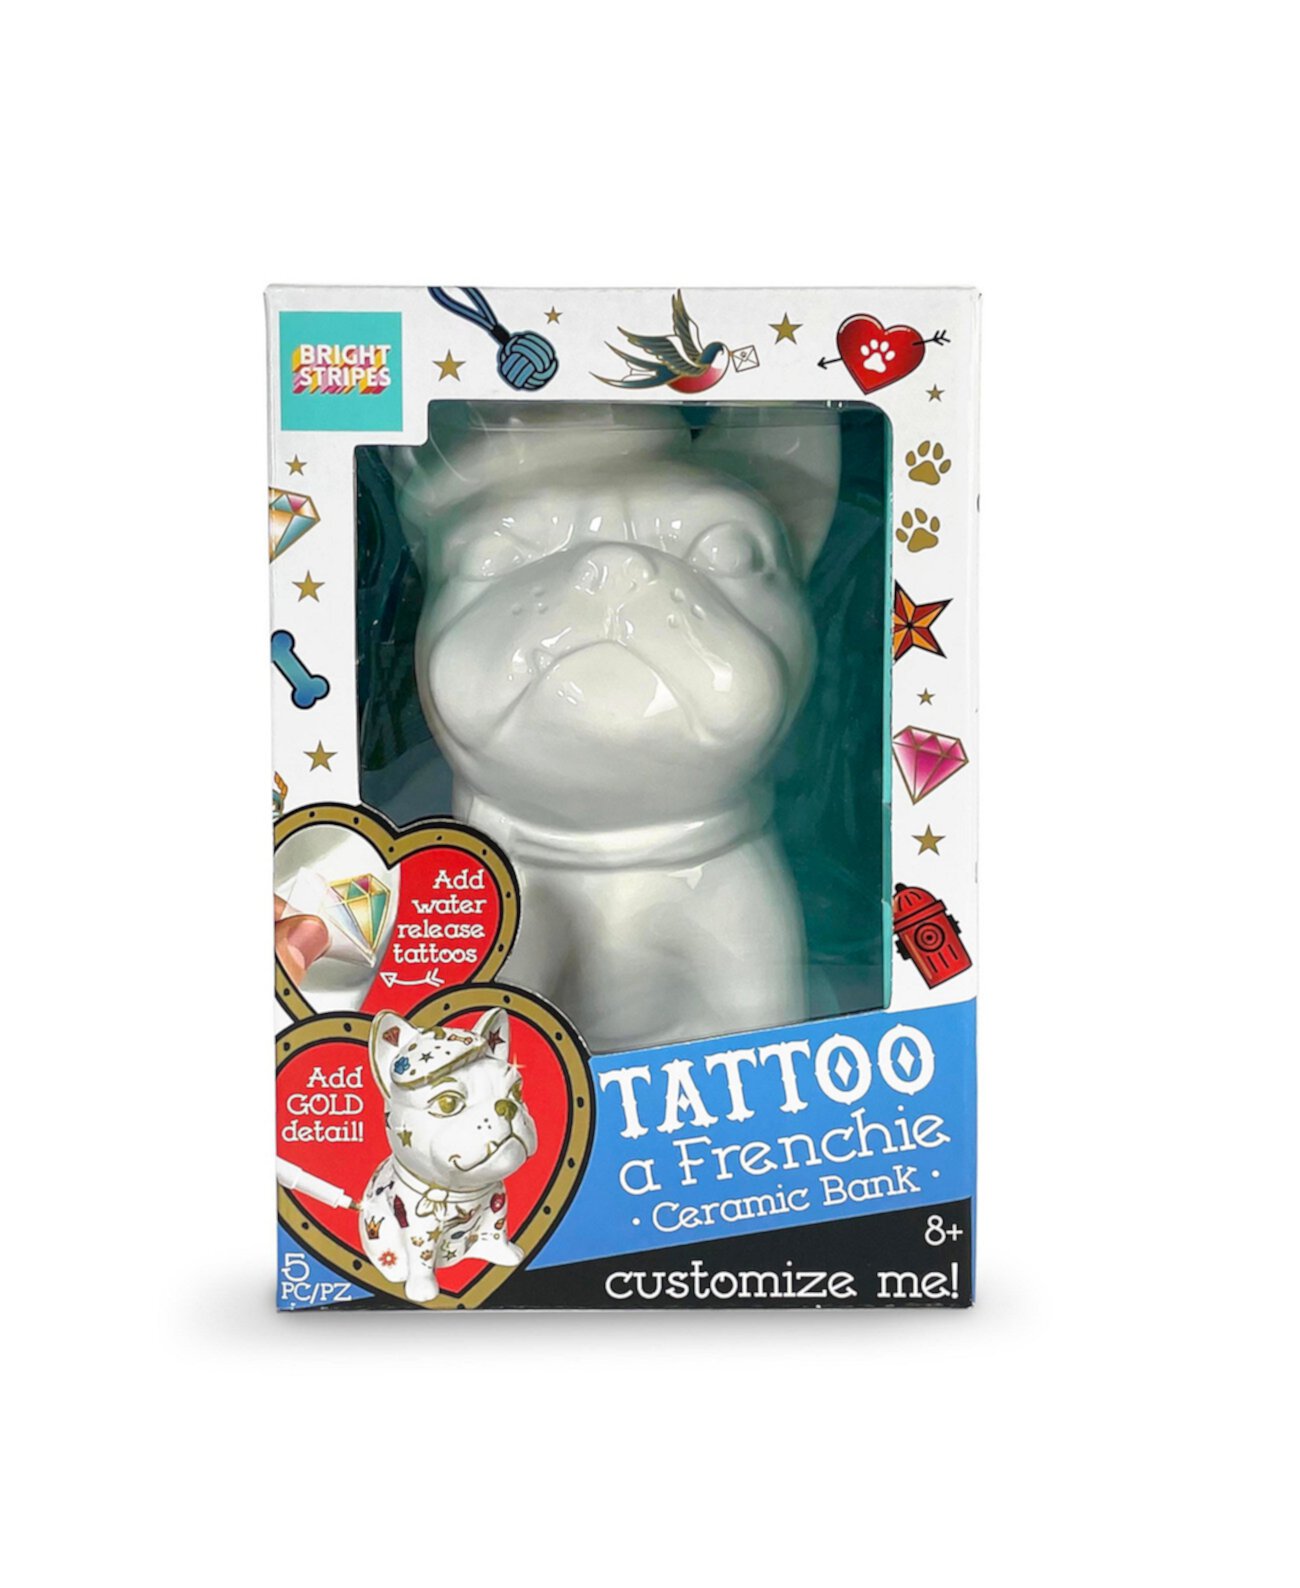 Tattoo a Frenchie Decorate a Ceramic Bank Craft Kit, 5 Pieces Bright Stripes